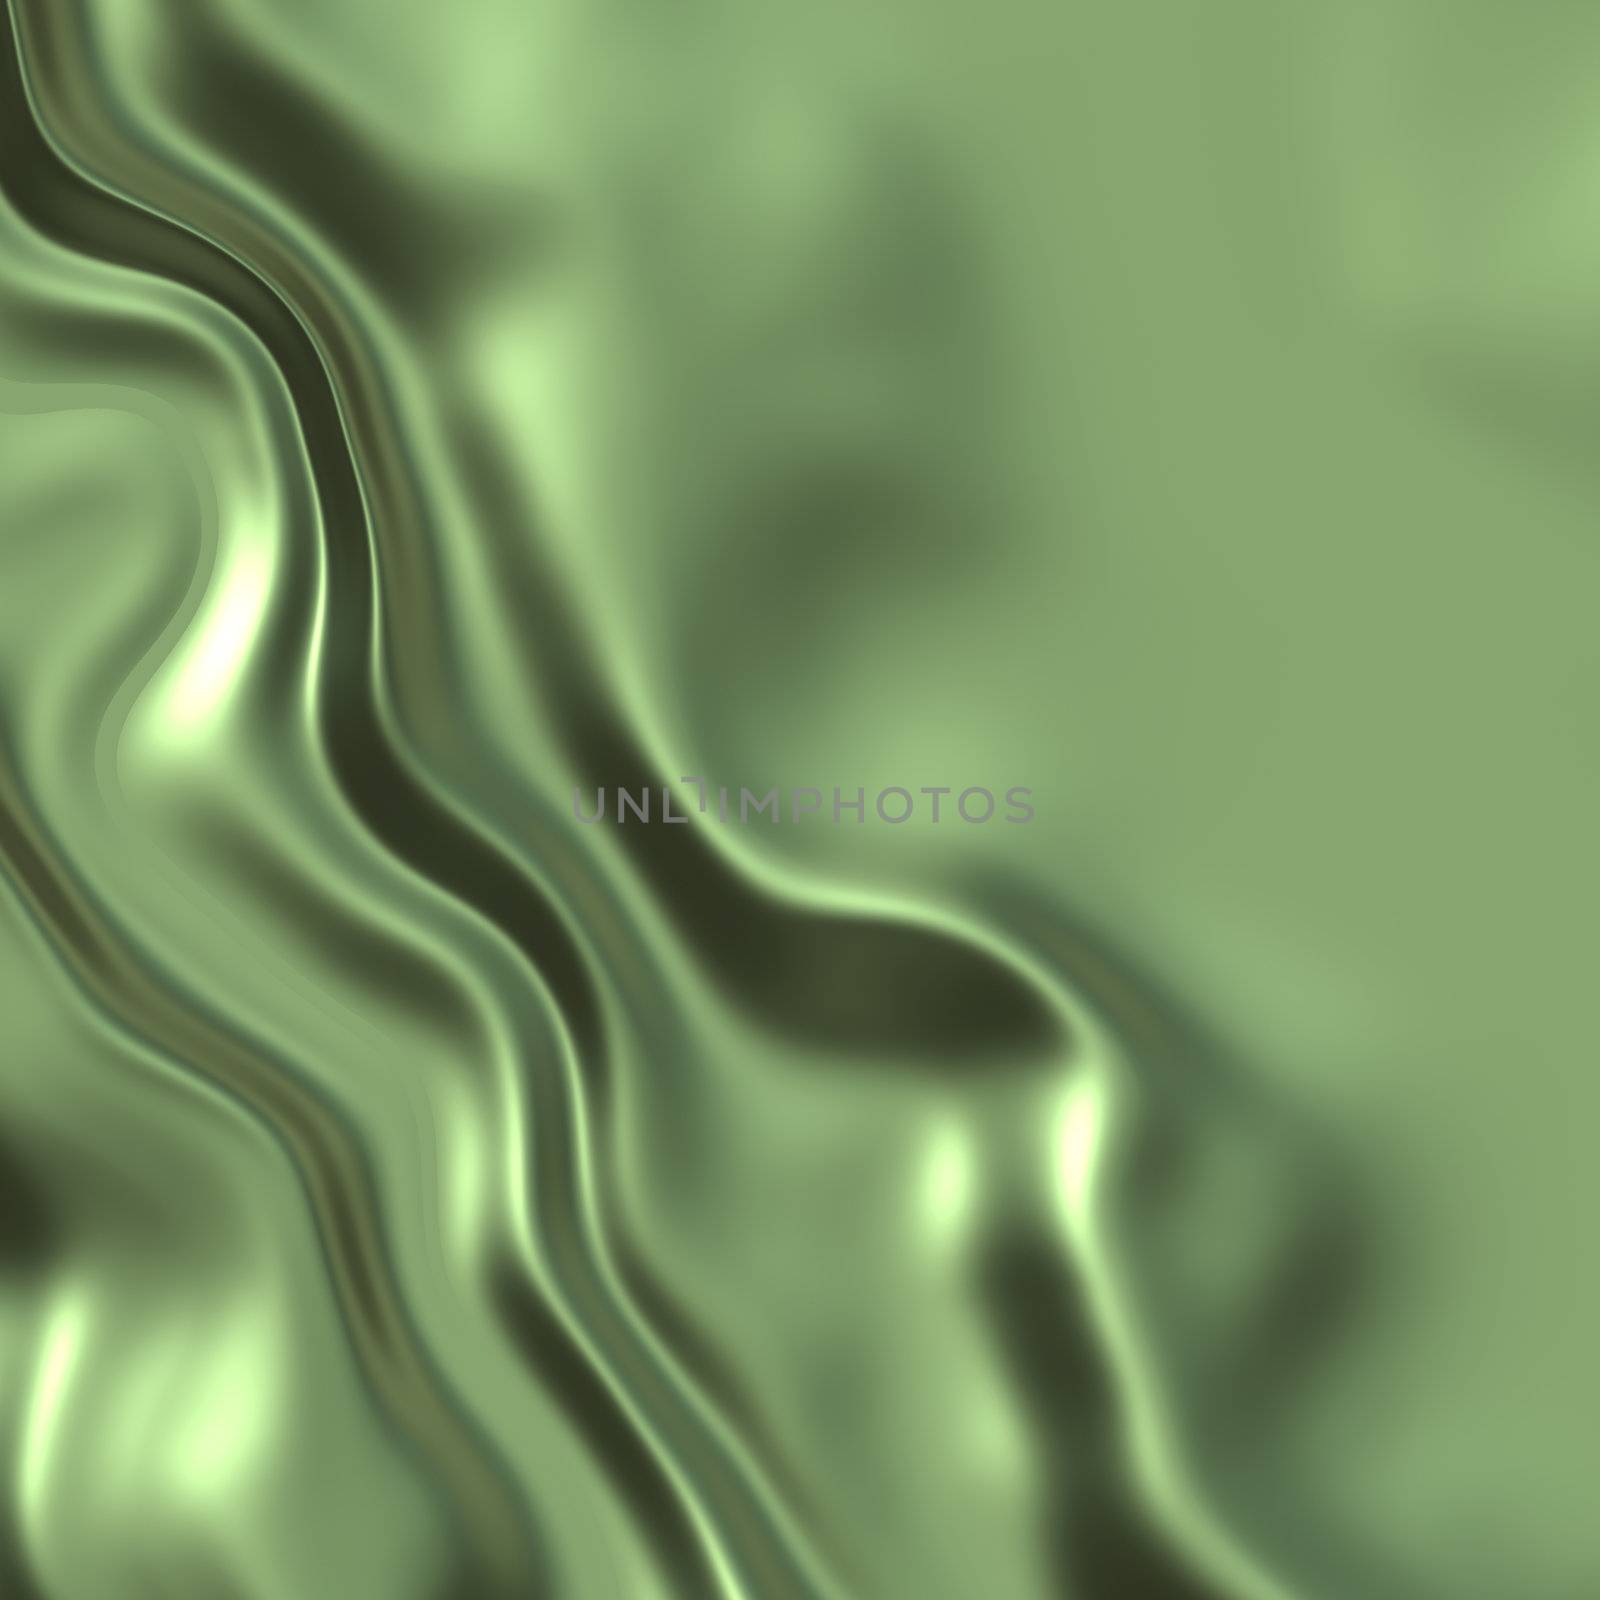 An image of a nice green silk background